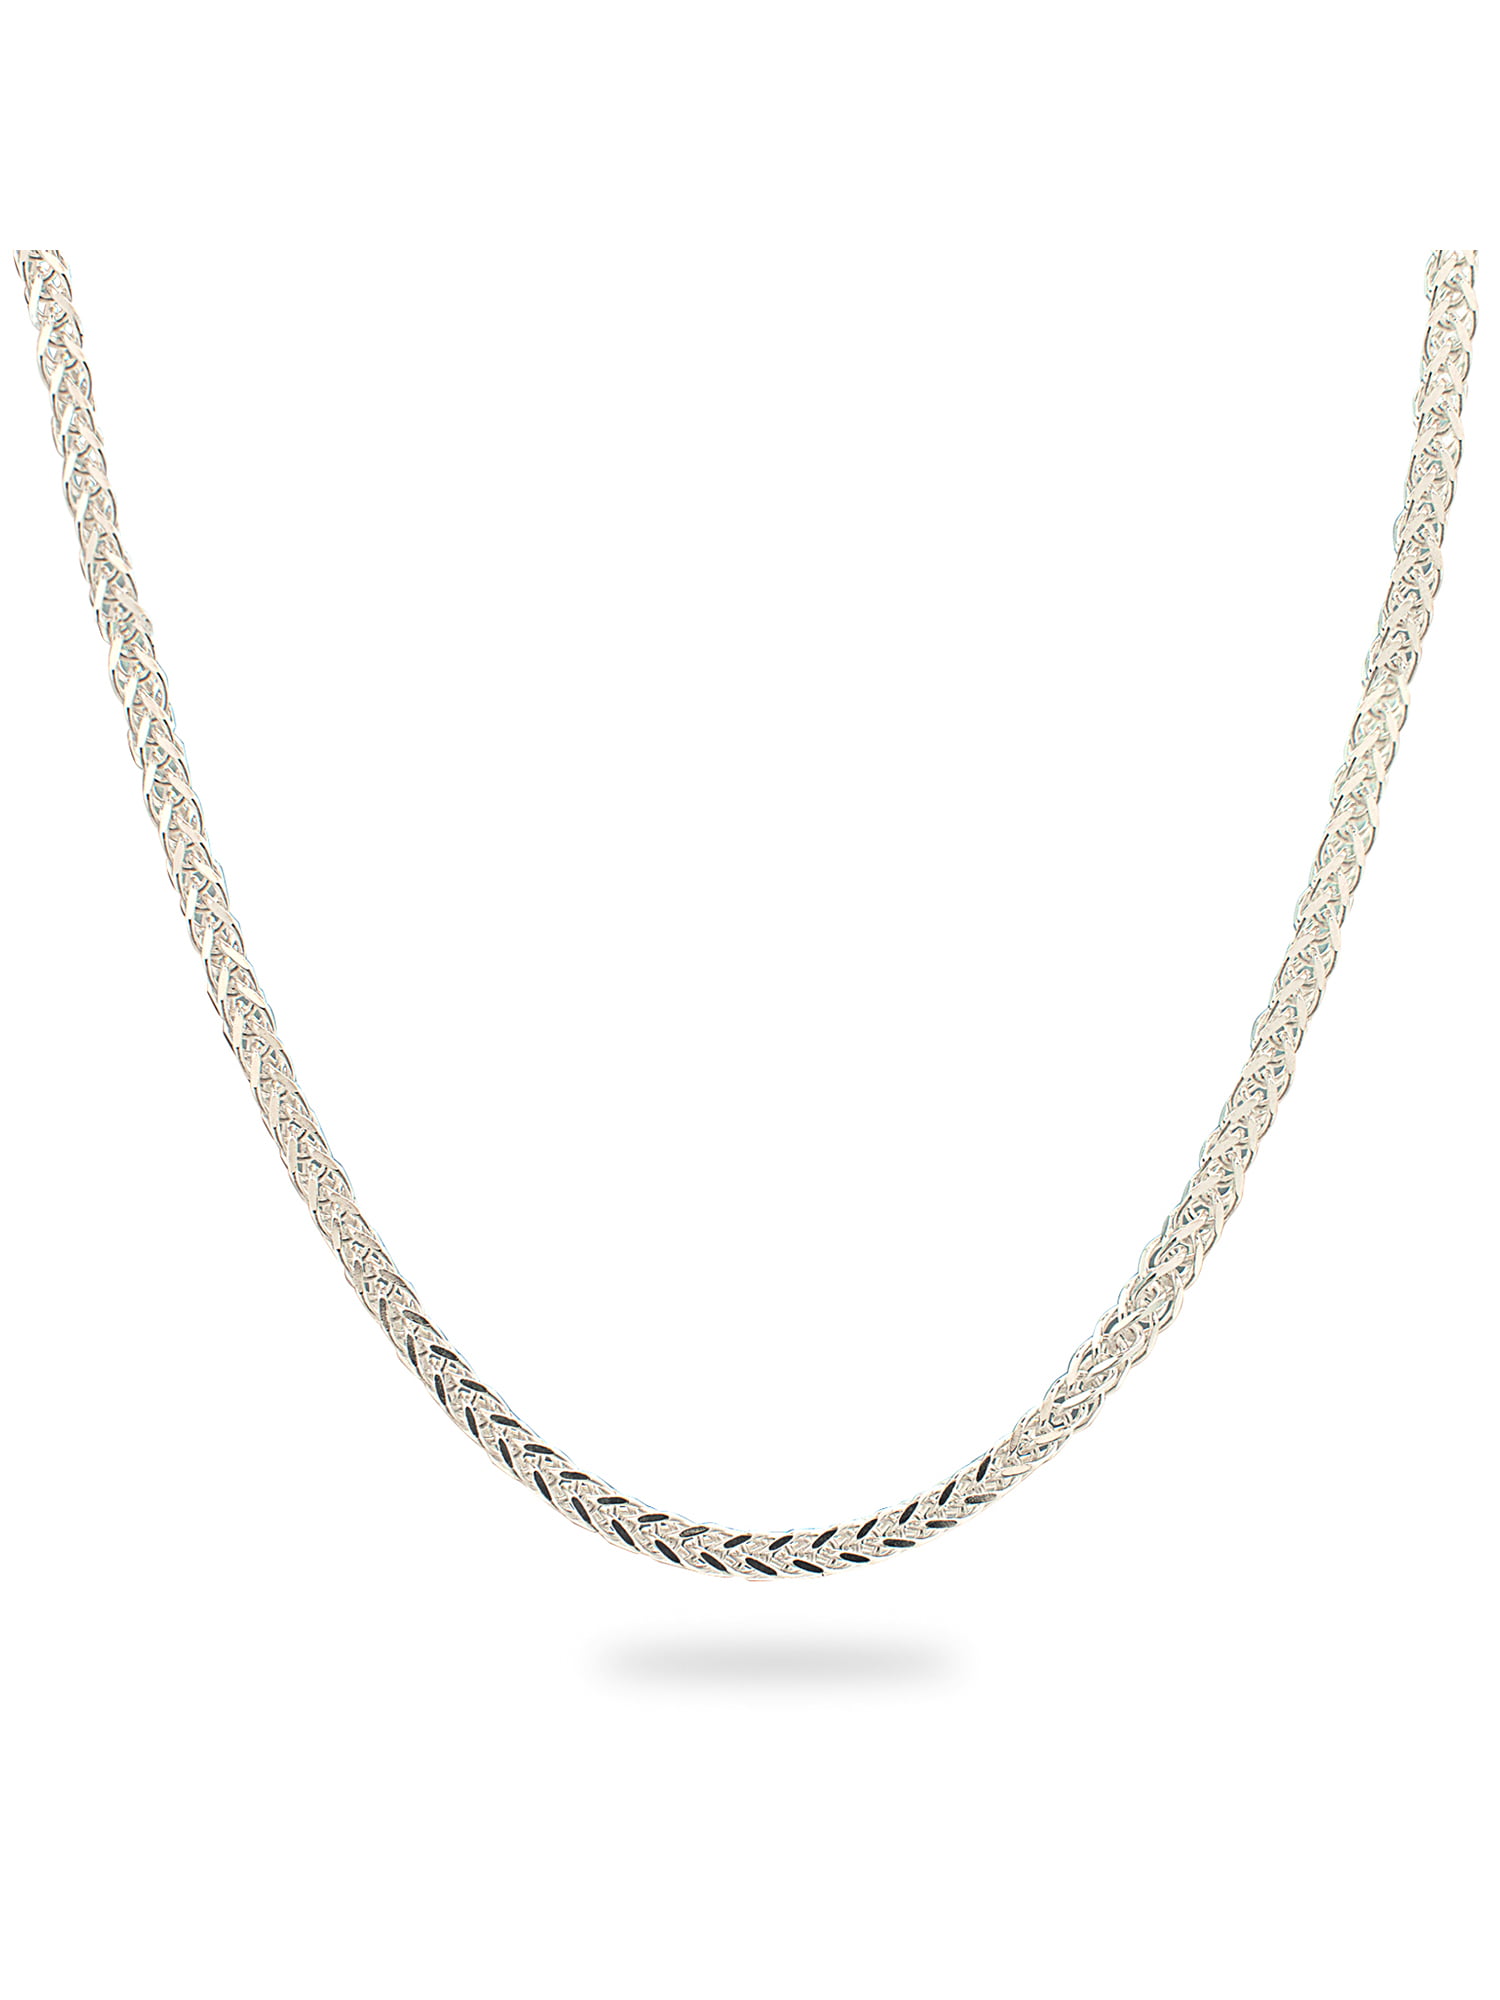 Sterling .925 Silver Rhodium 1.1mm Diamond Cut Round Box Chain 16-24 Necklace Lobster Clasp by IcedTime